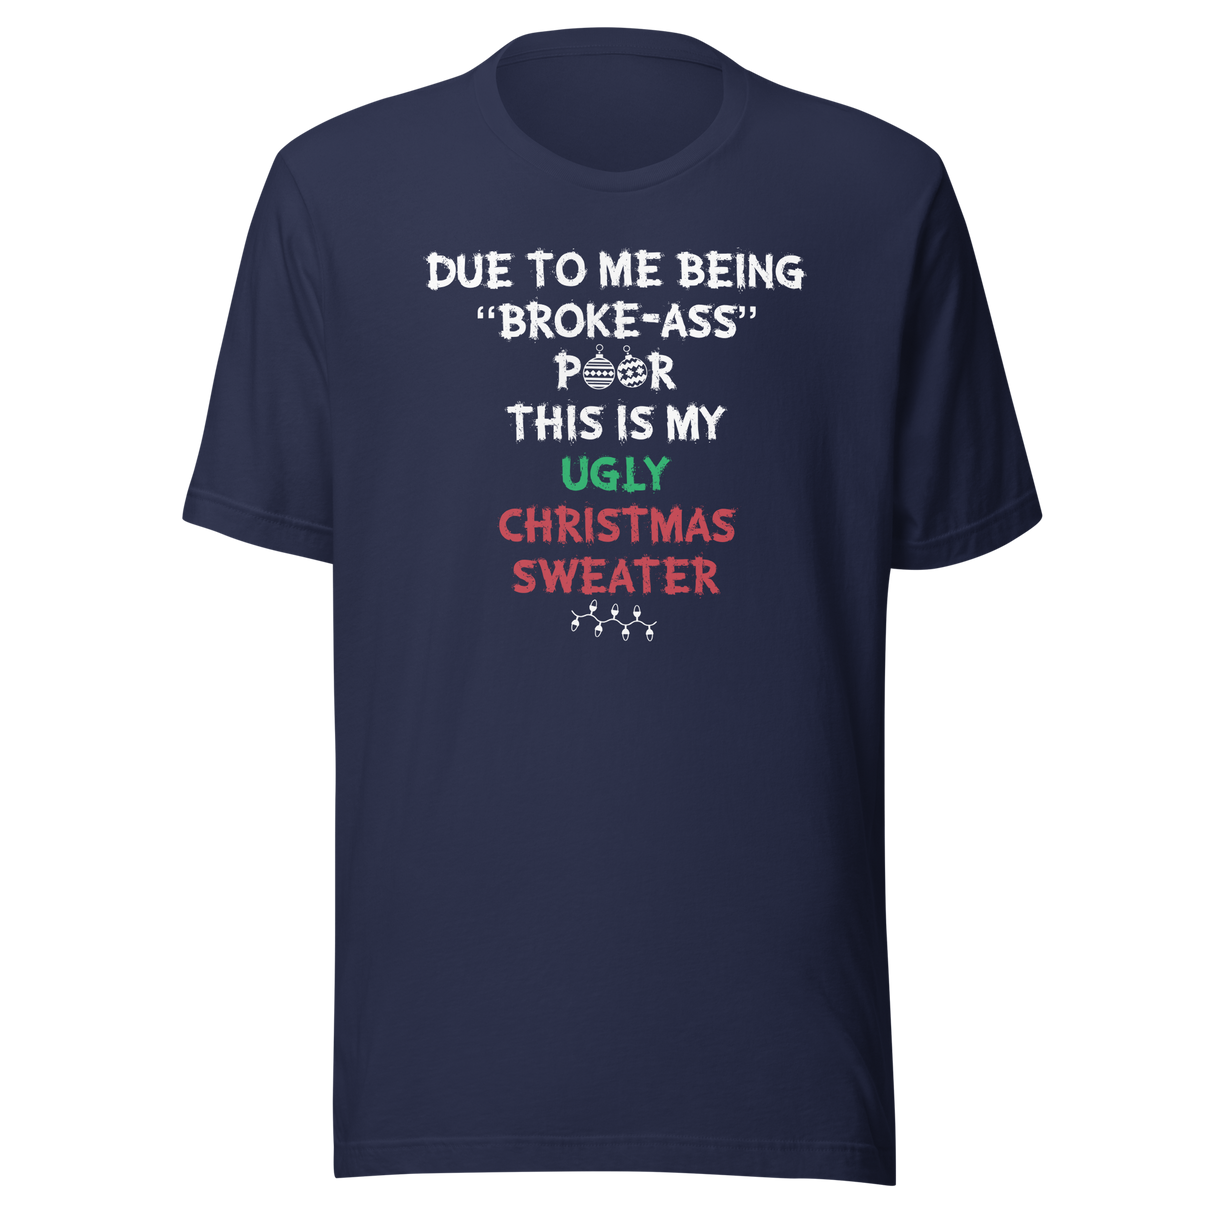 due-to-me-being-broke-ass-poor-this-is-my-christmas-sweater-holidays-tee-christmas-t-shirt-holidays-tee-humor-t-shirt-quirky-tee#color_navy